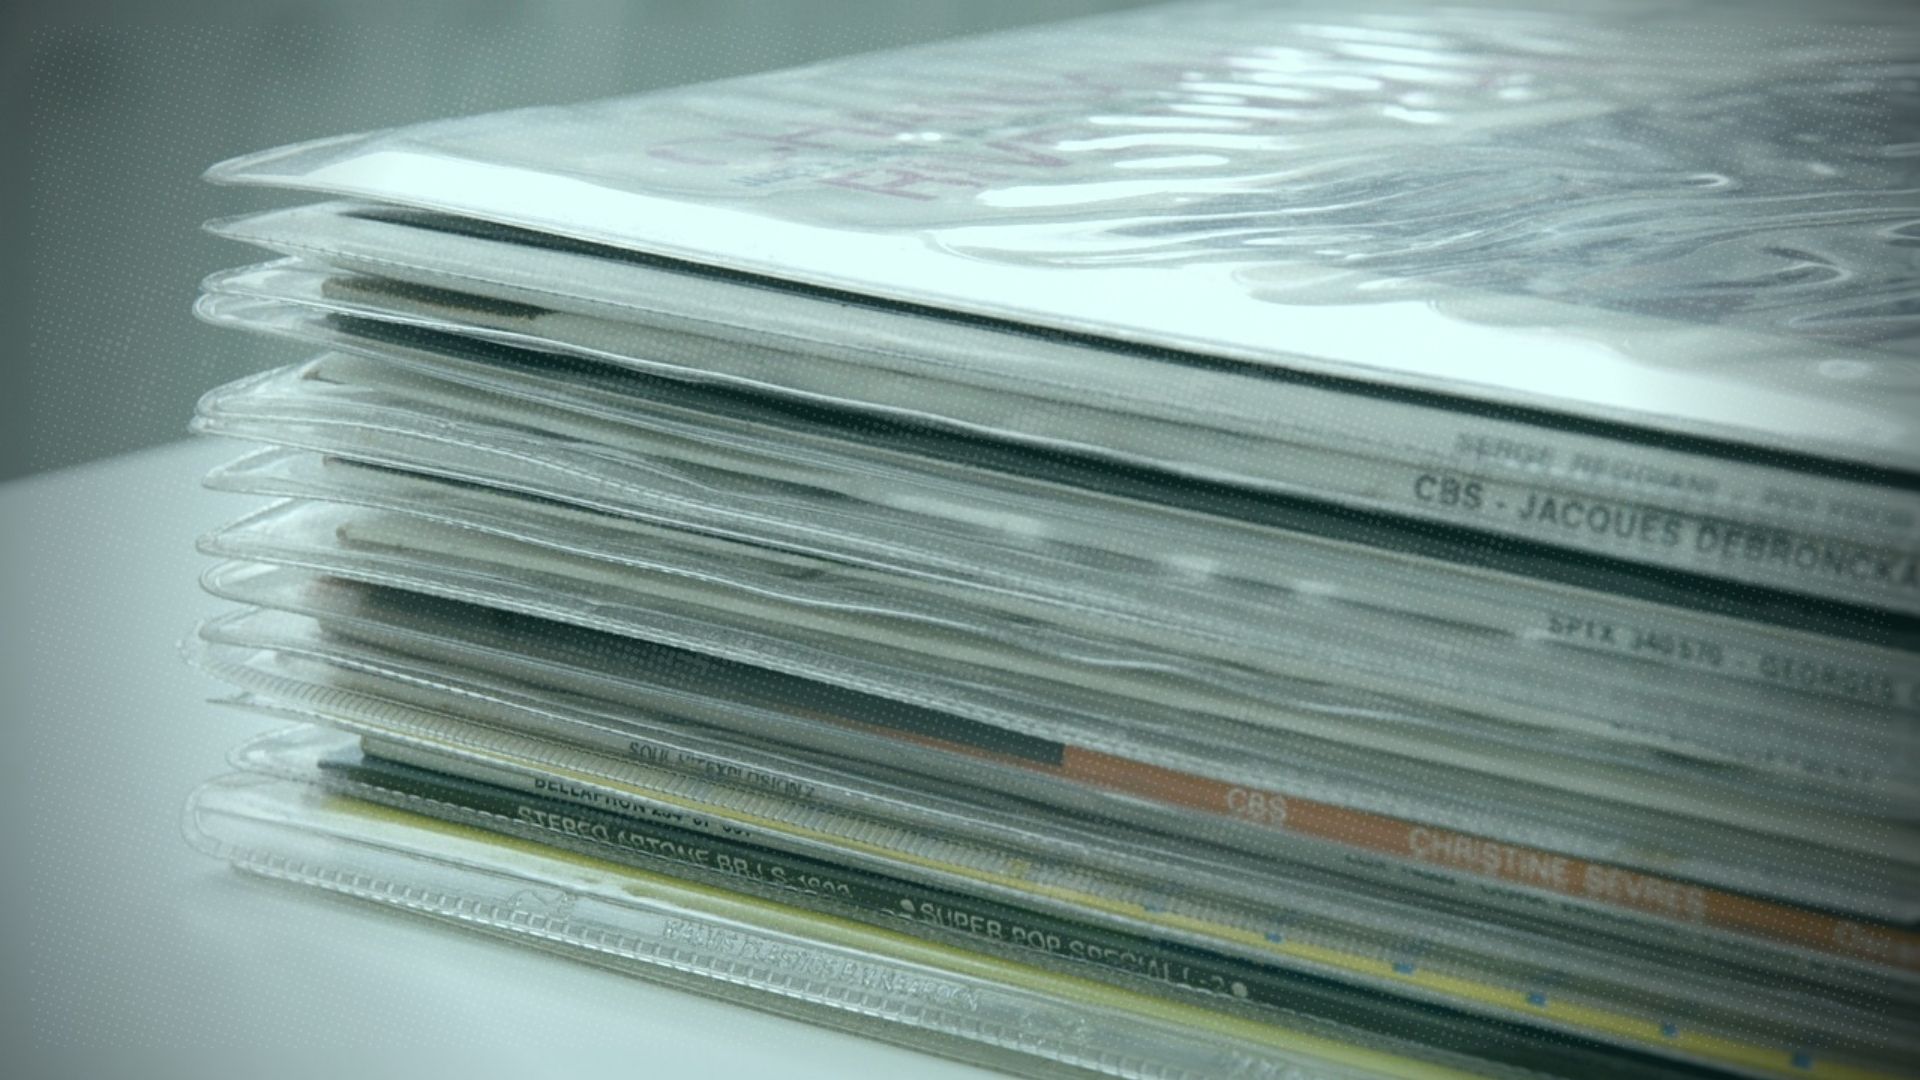 A stack of vinyl records in sleeves